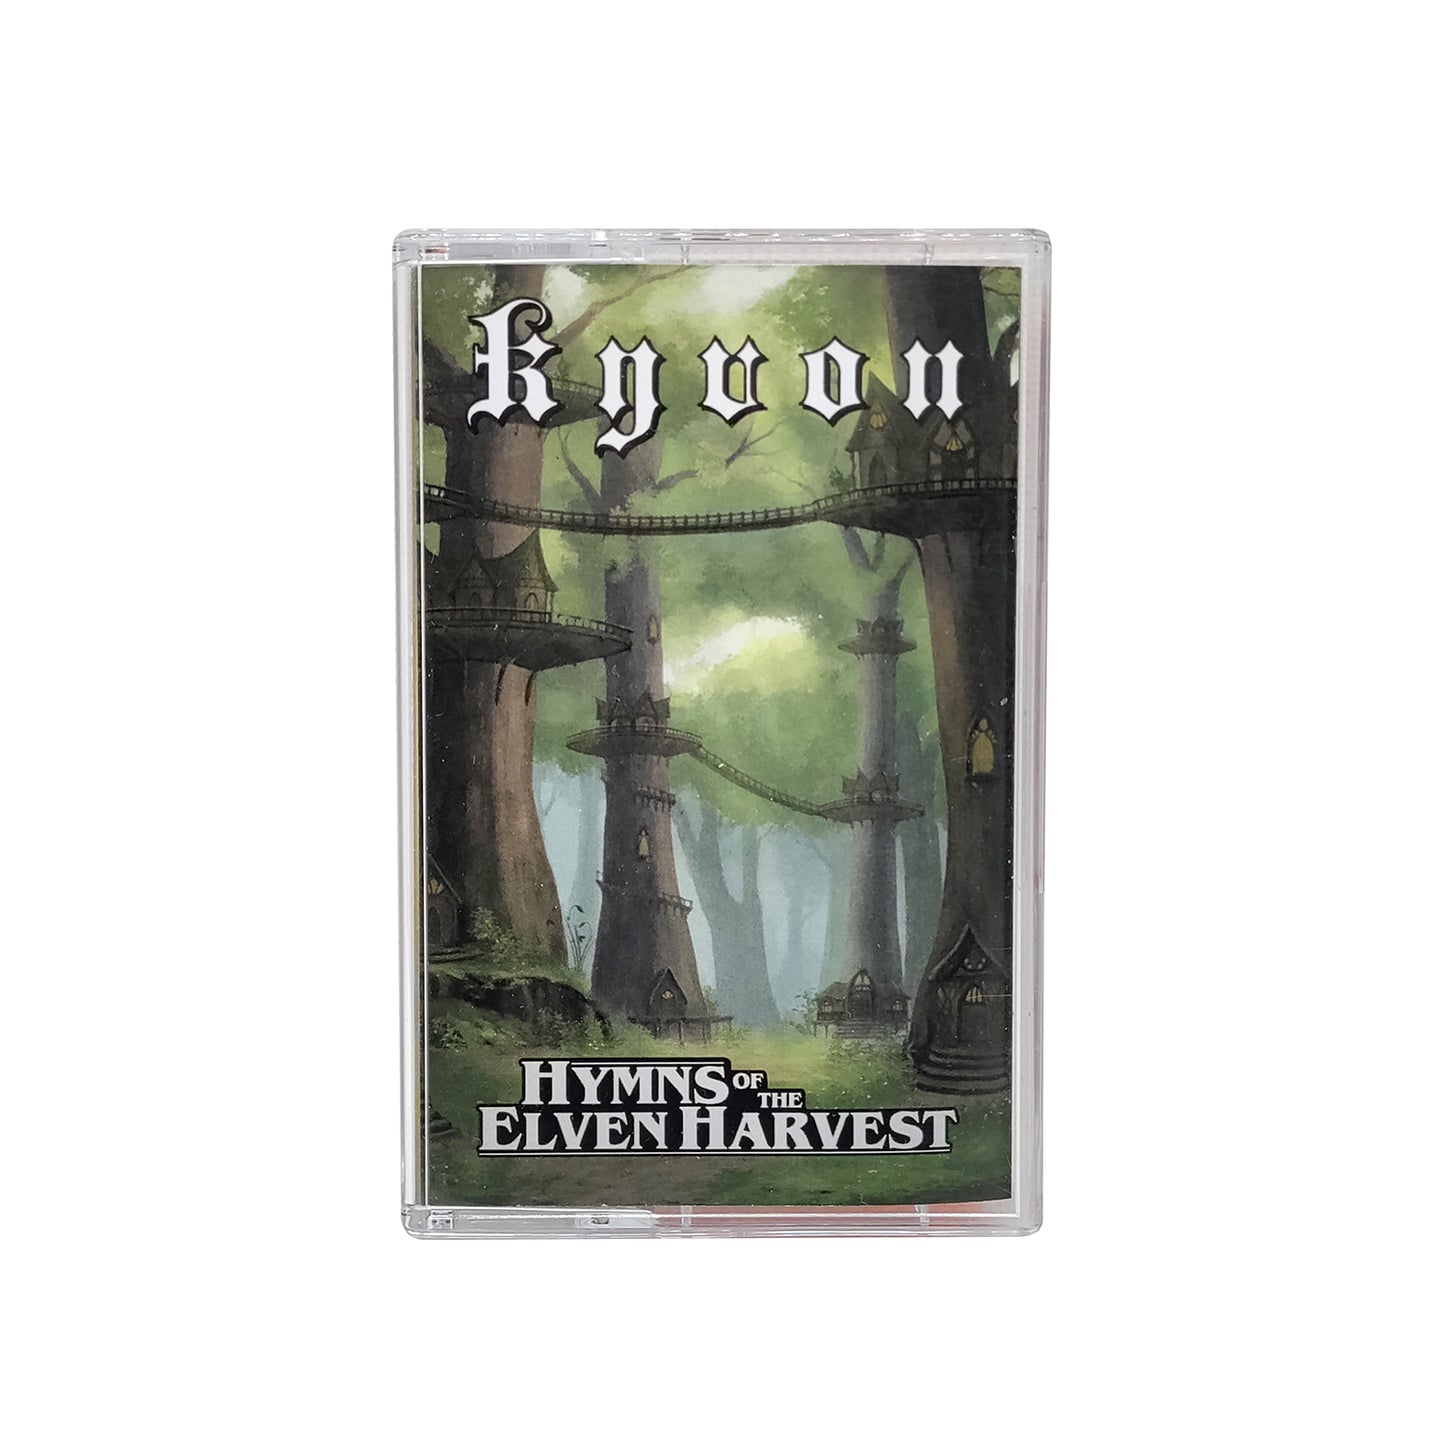 [SOLD OUT] KYVON "Hymns Of The Elven Harvest" cassette tape